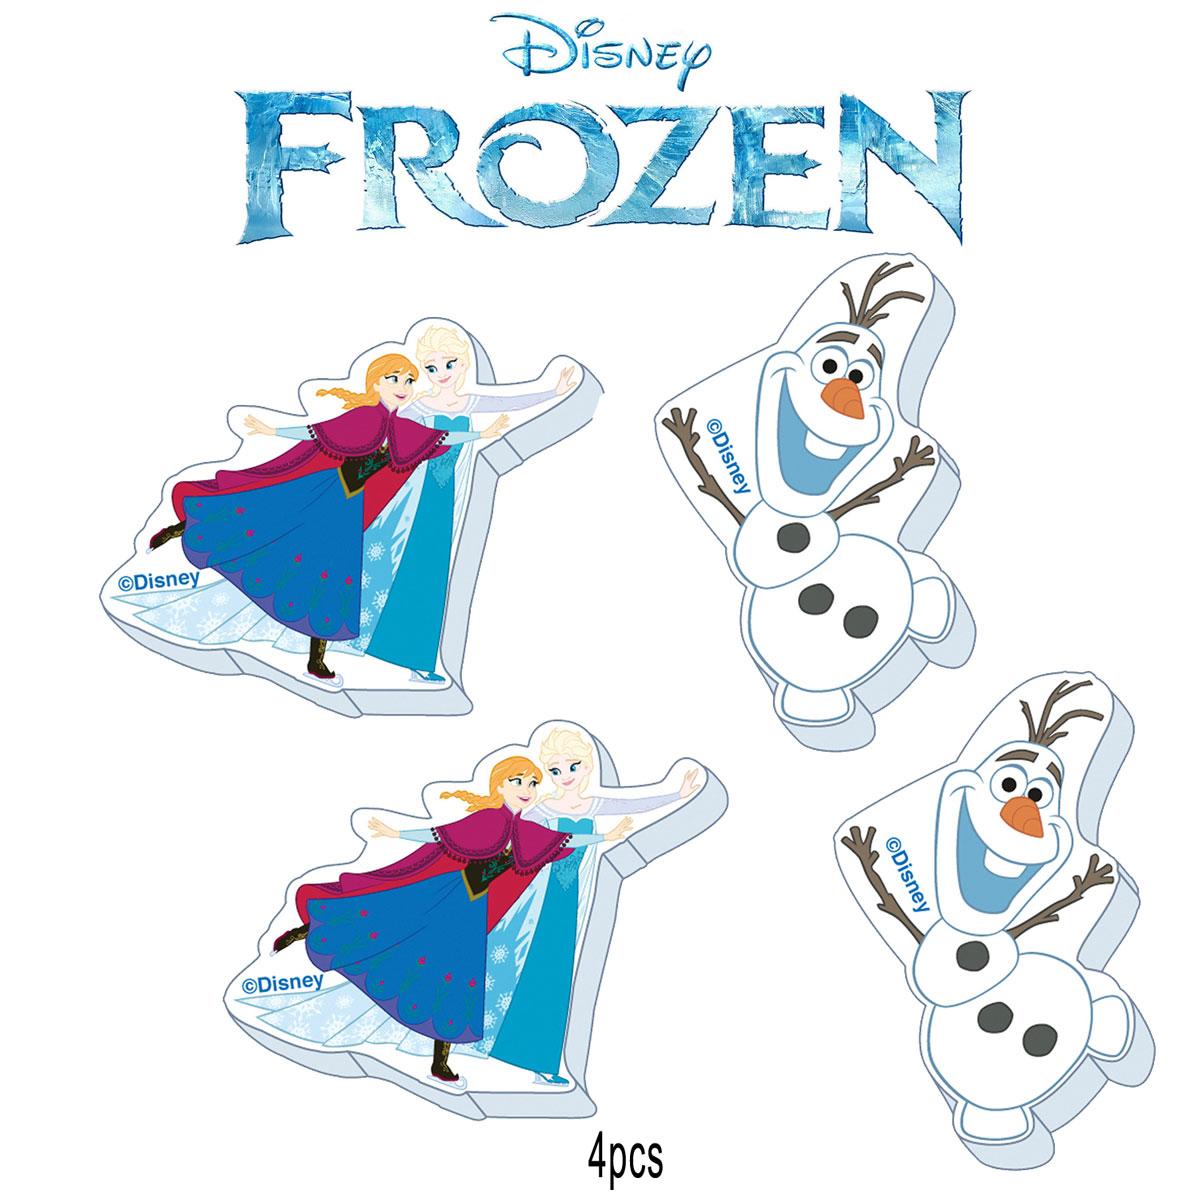 Disney's Frozen Character Eraser Assortment 4 pc pack by Amscan 999274 available here at Karnival Costumes online party shop